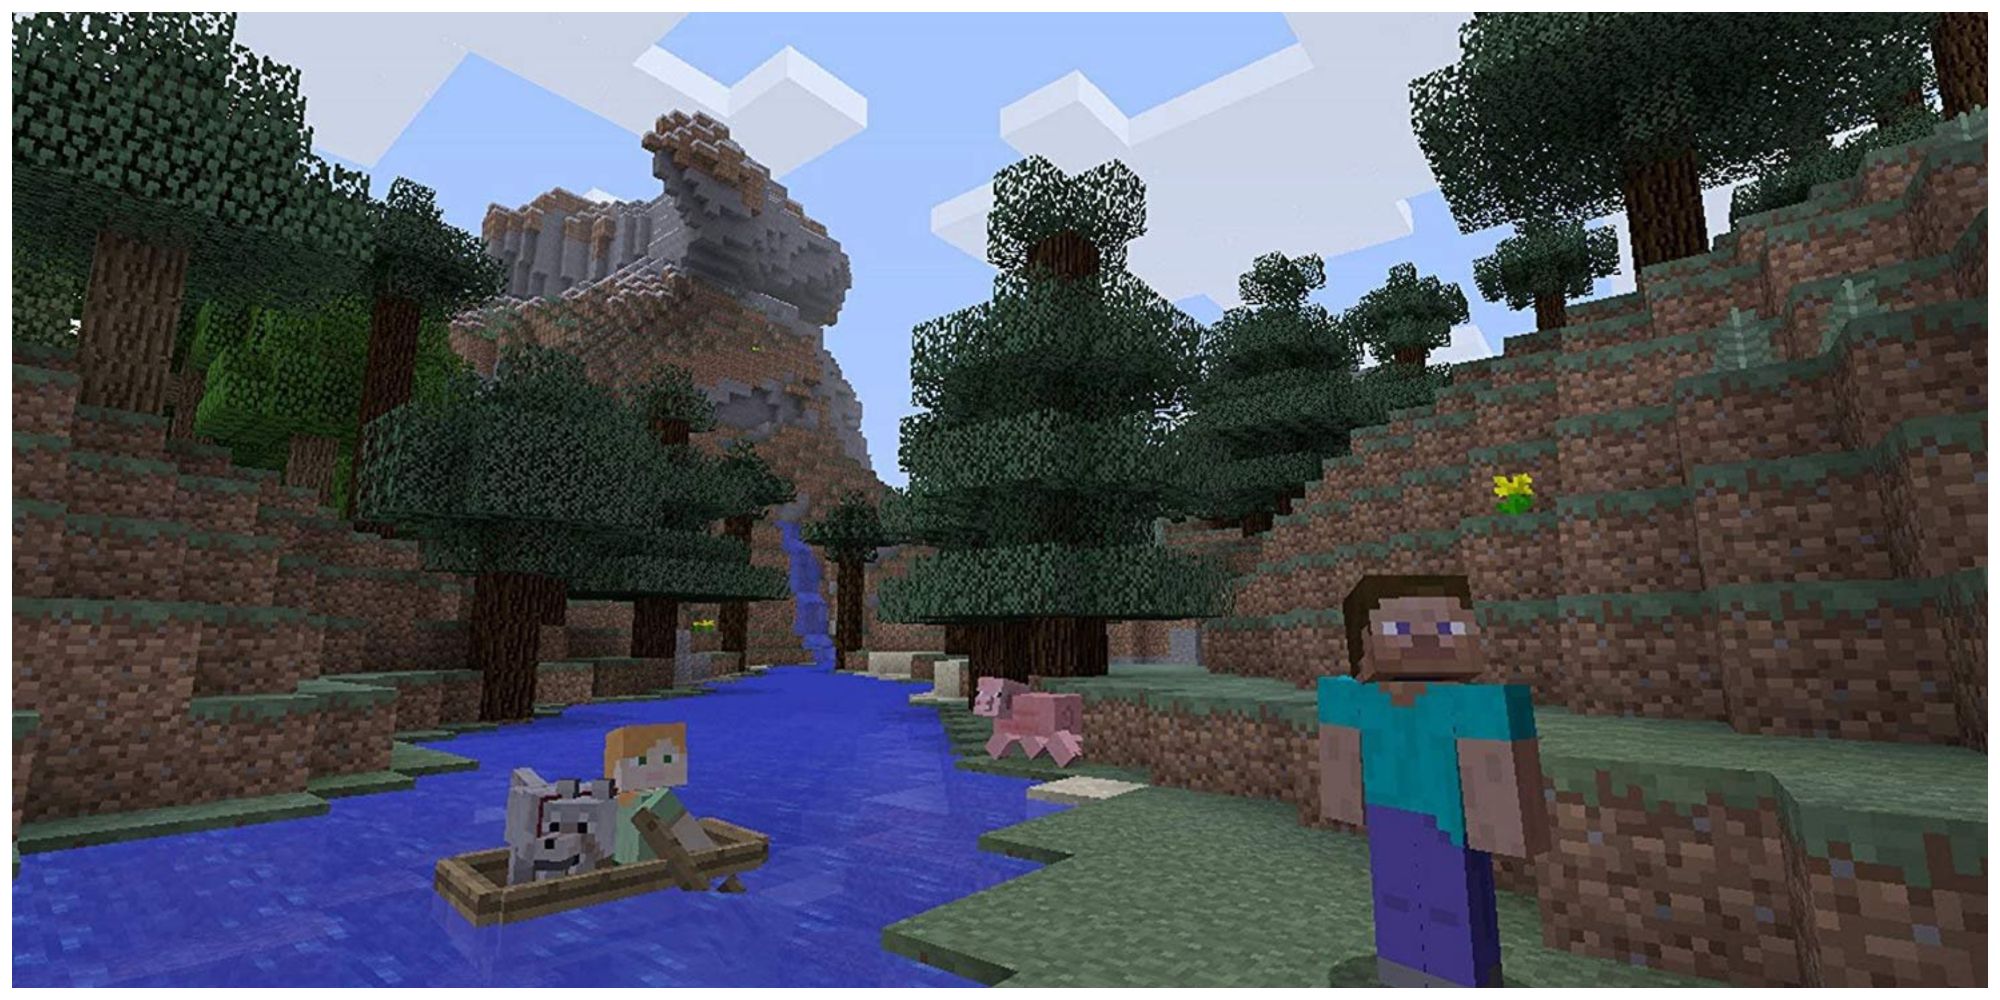 Minecraft characters, Steve and Alex and a dog